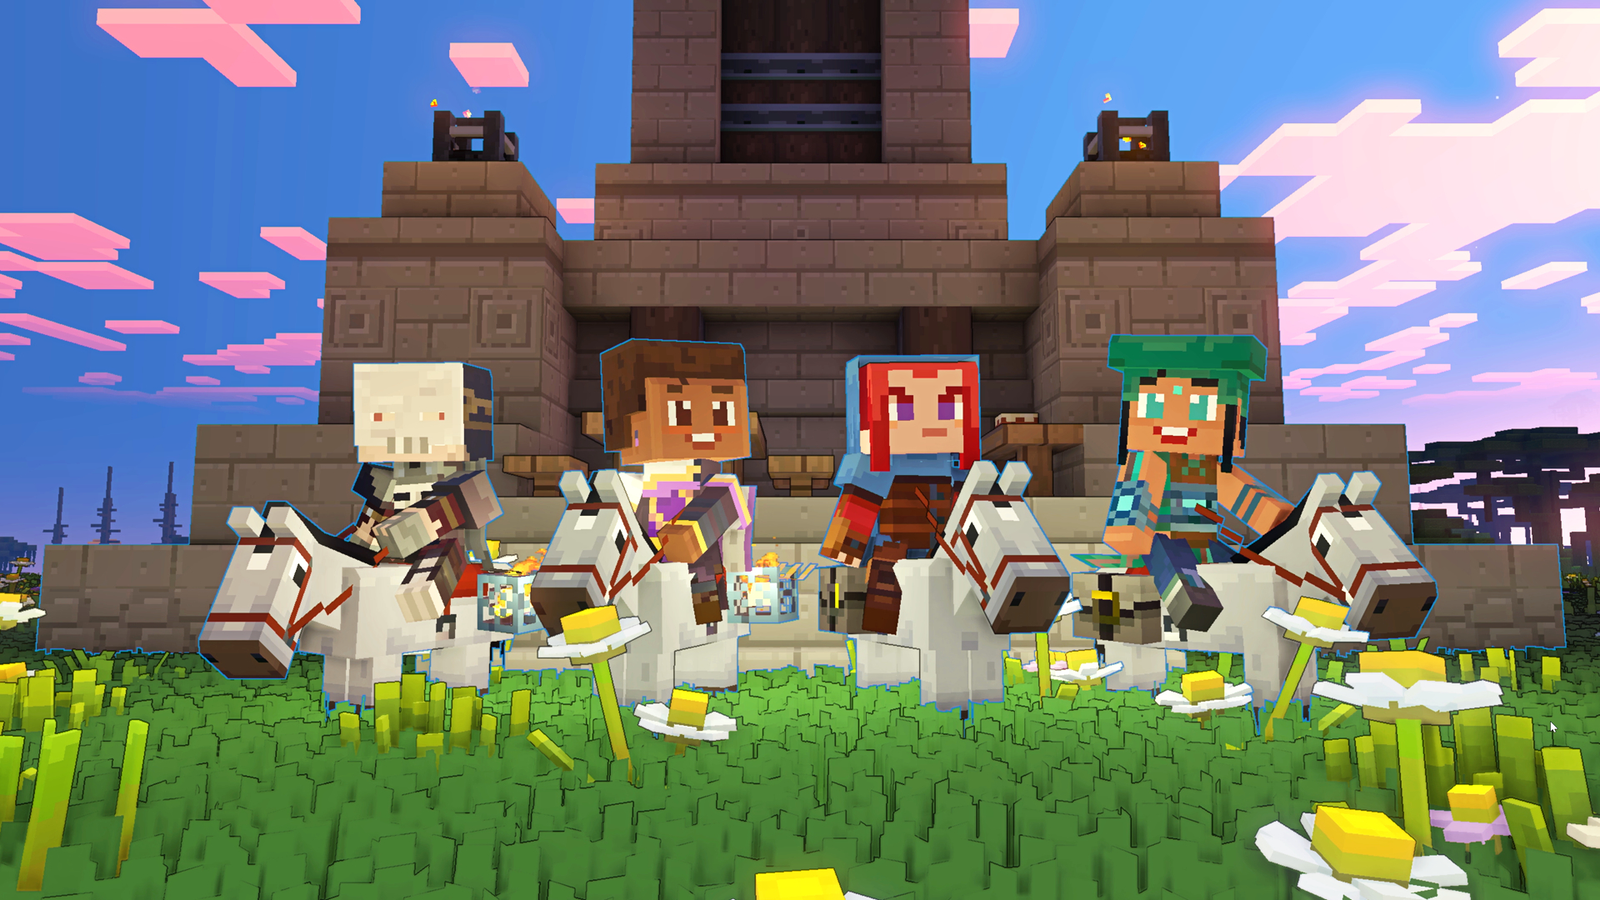 Minecraft Legends Co-Op: How to Play PvP and Campaign With Friends